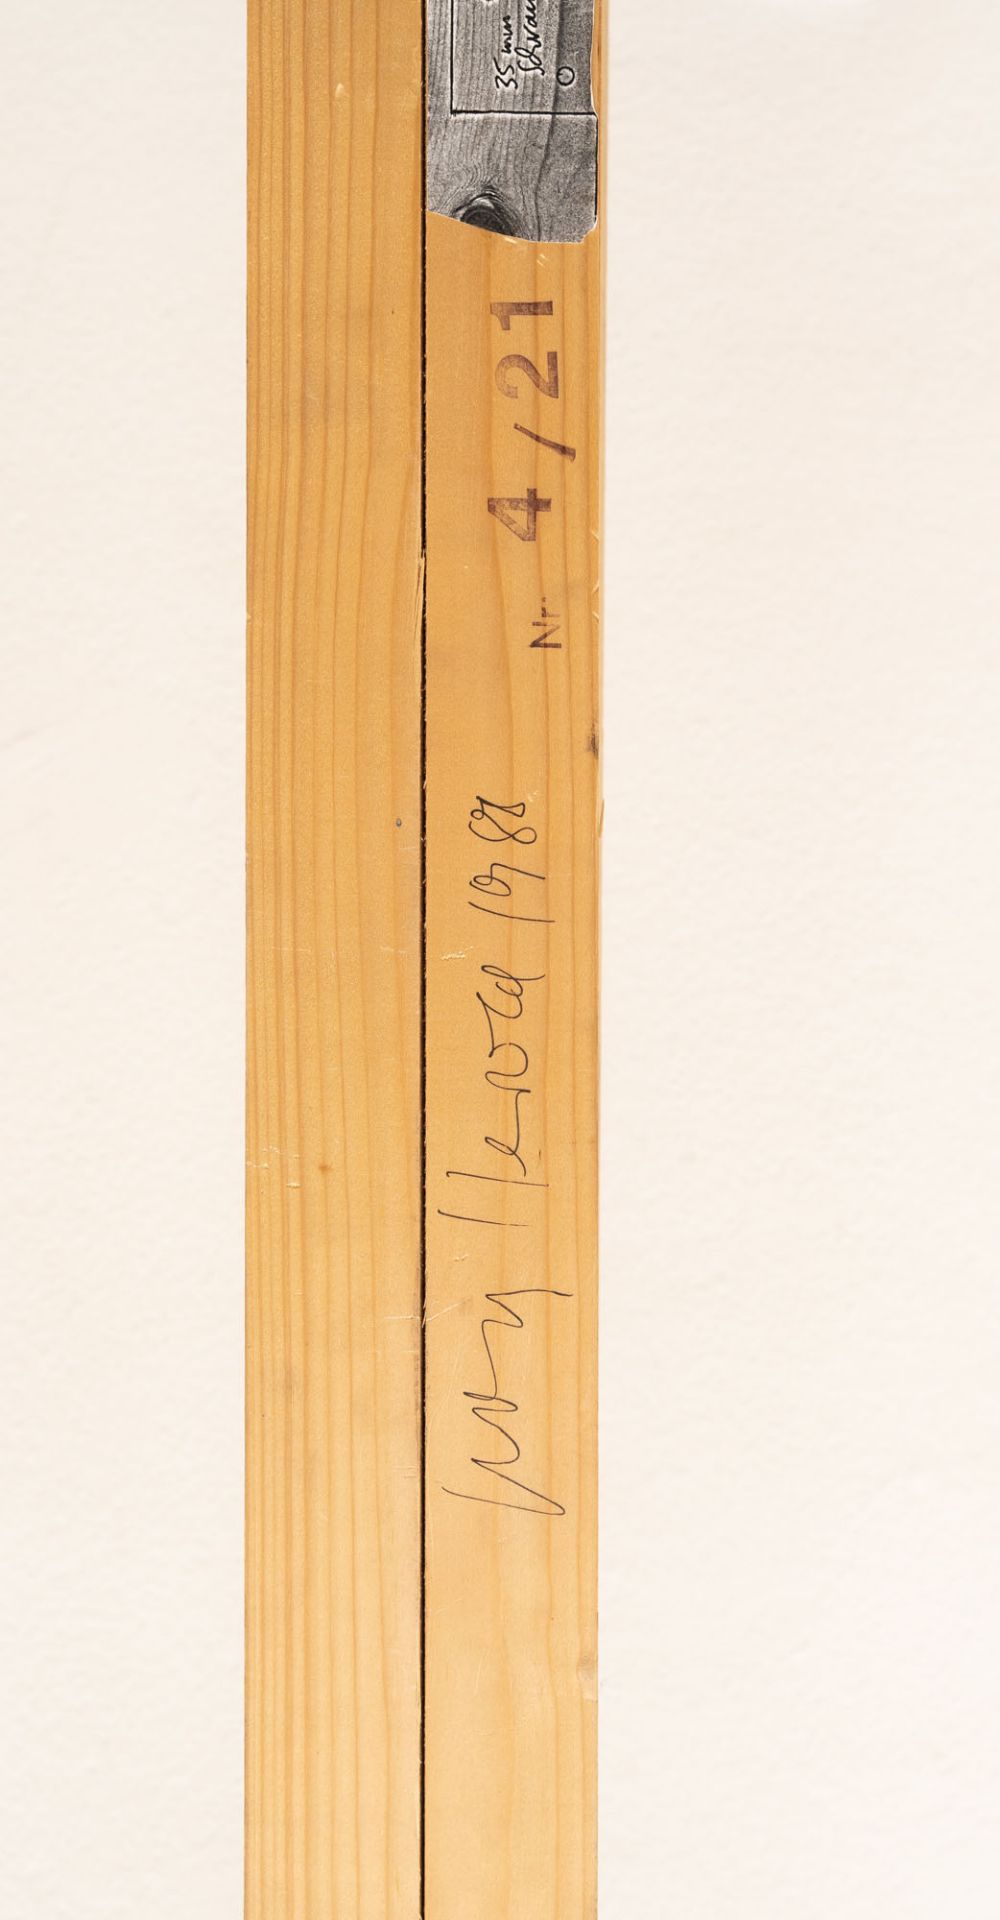 Georg Herold, Wood without space.Sculpture, wooden planks with tape and wire, stamped “HOLZ OHNE - Image 3 of 3